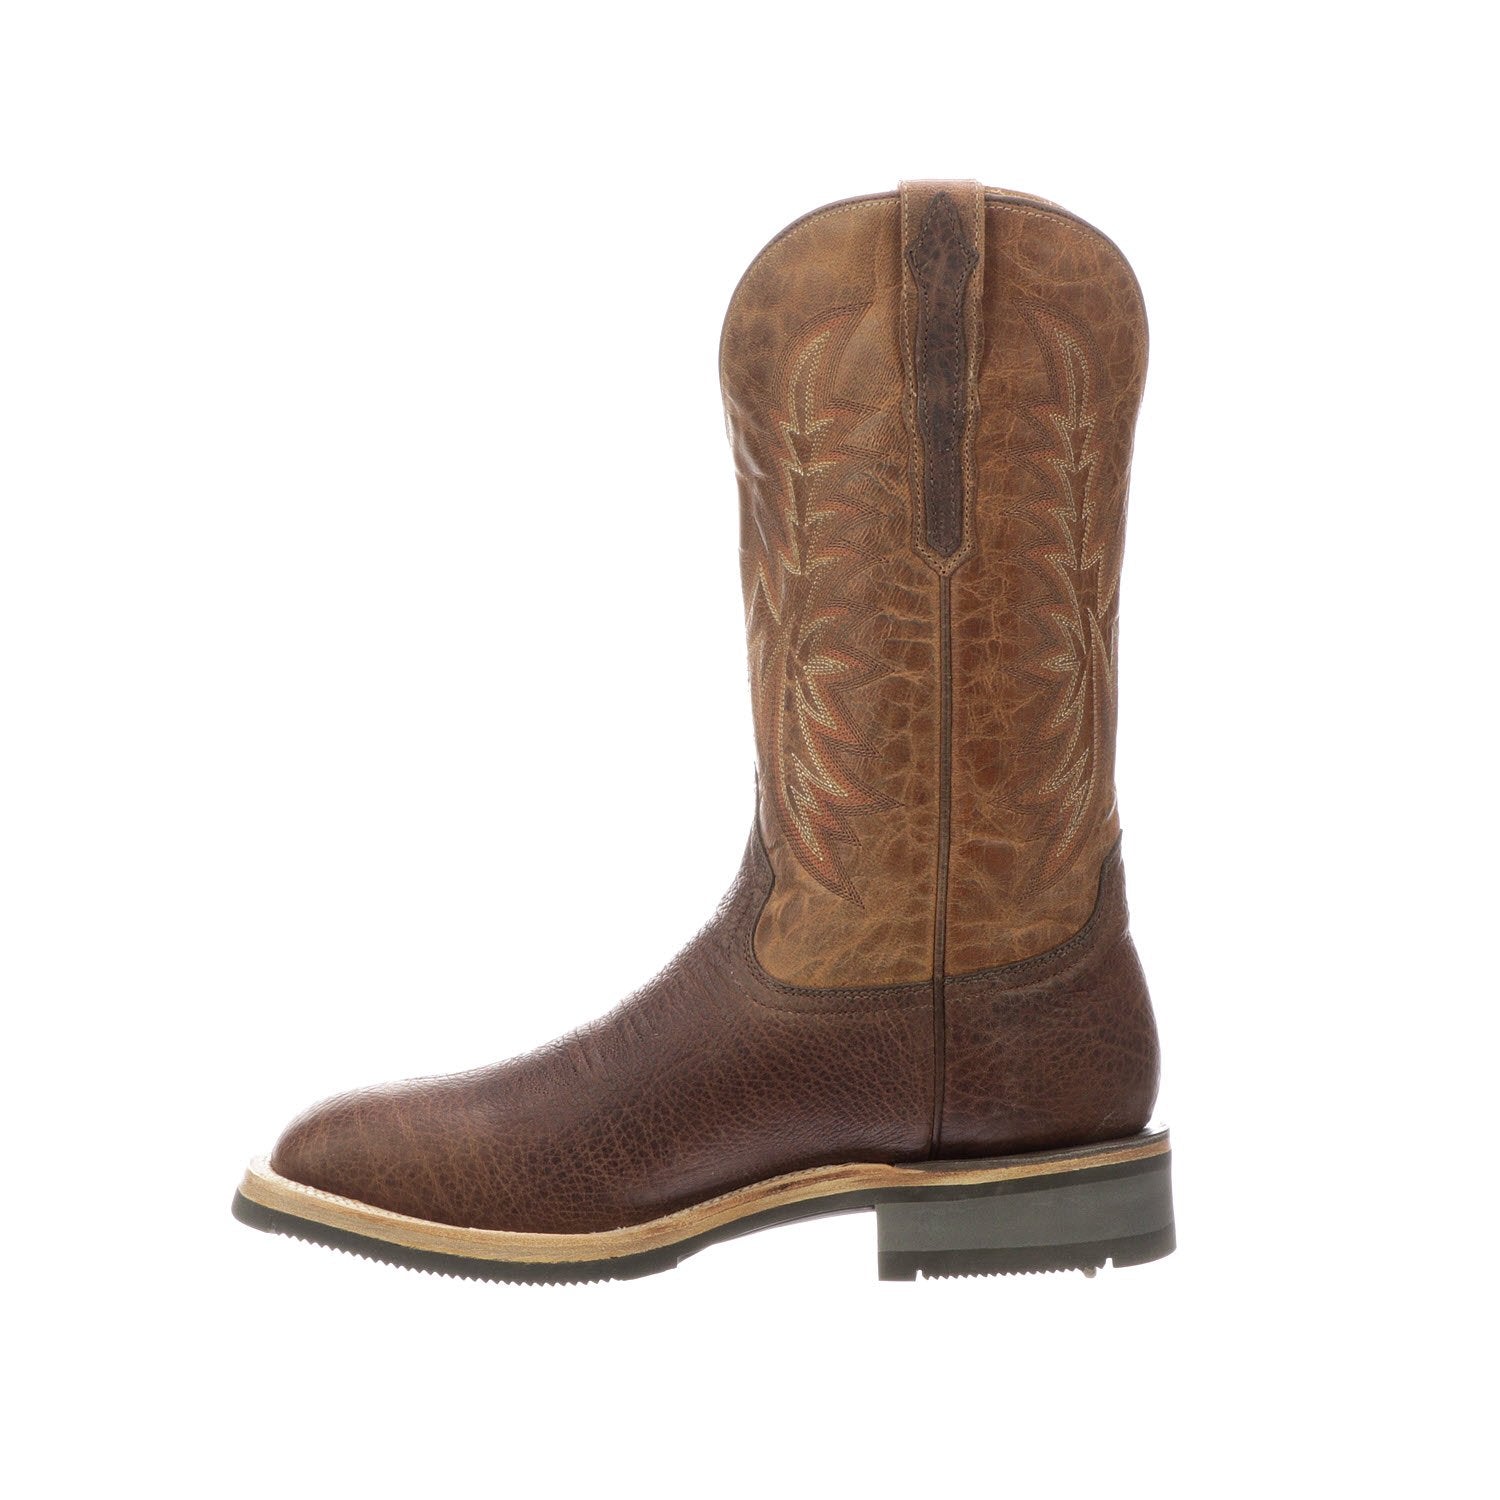 boot barn lucchese boots